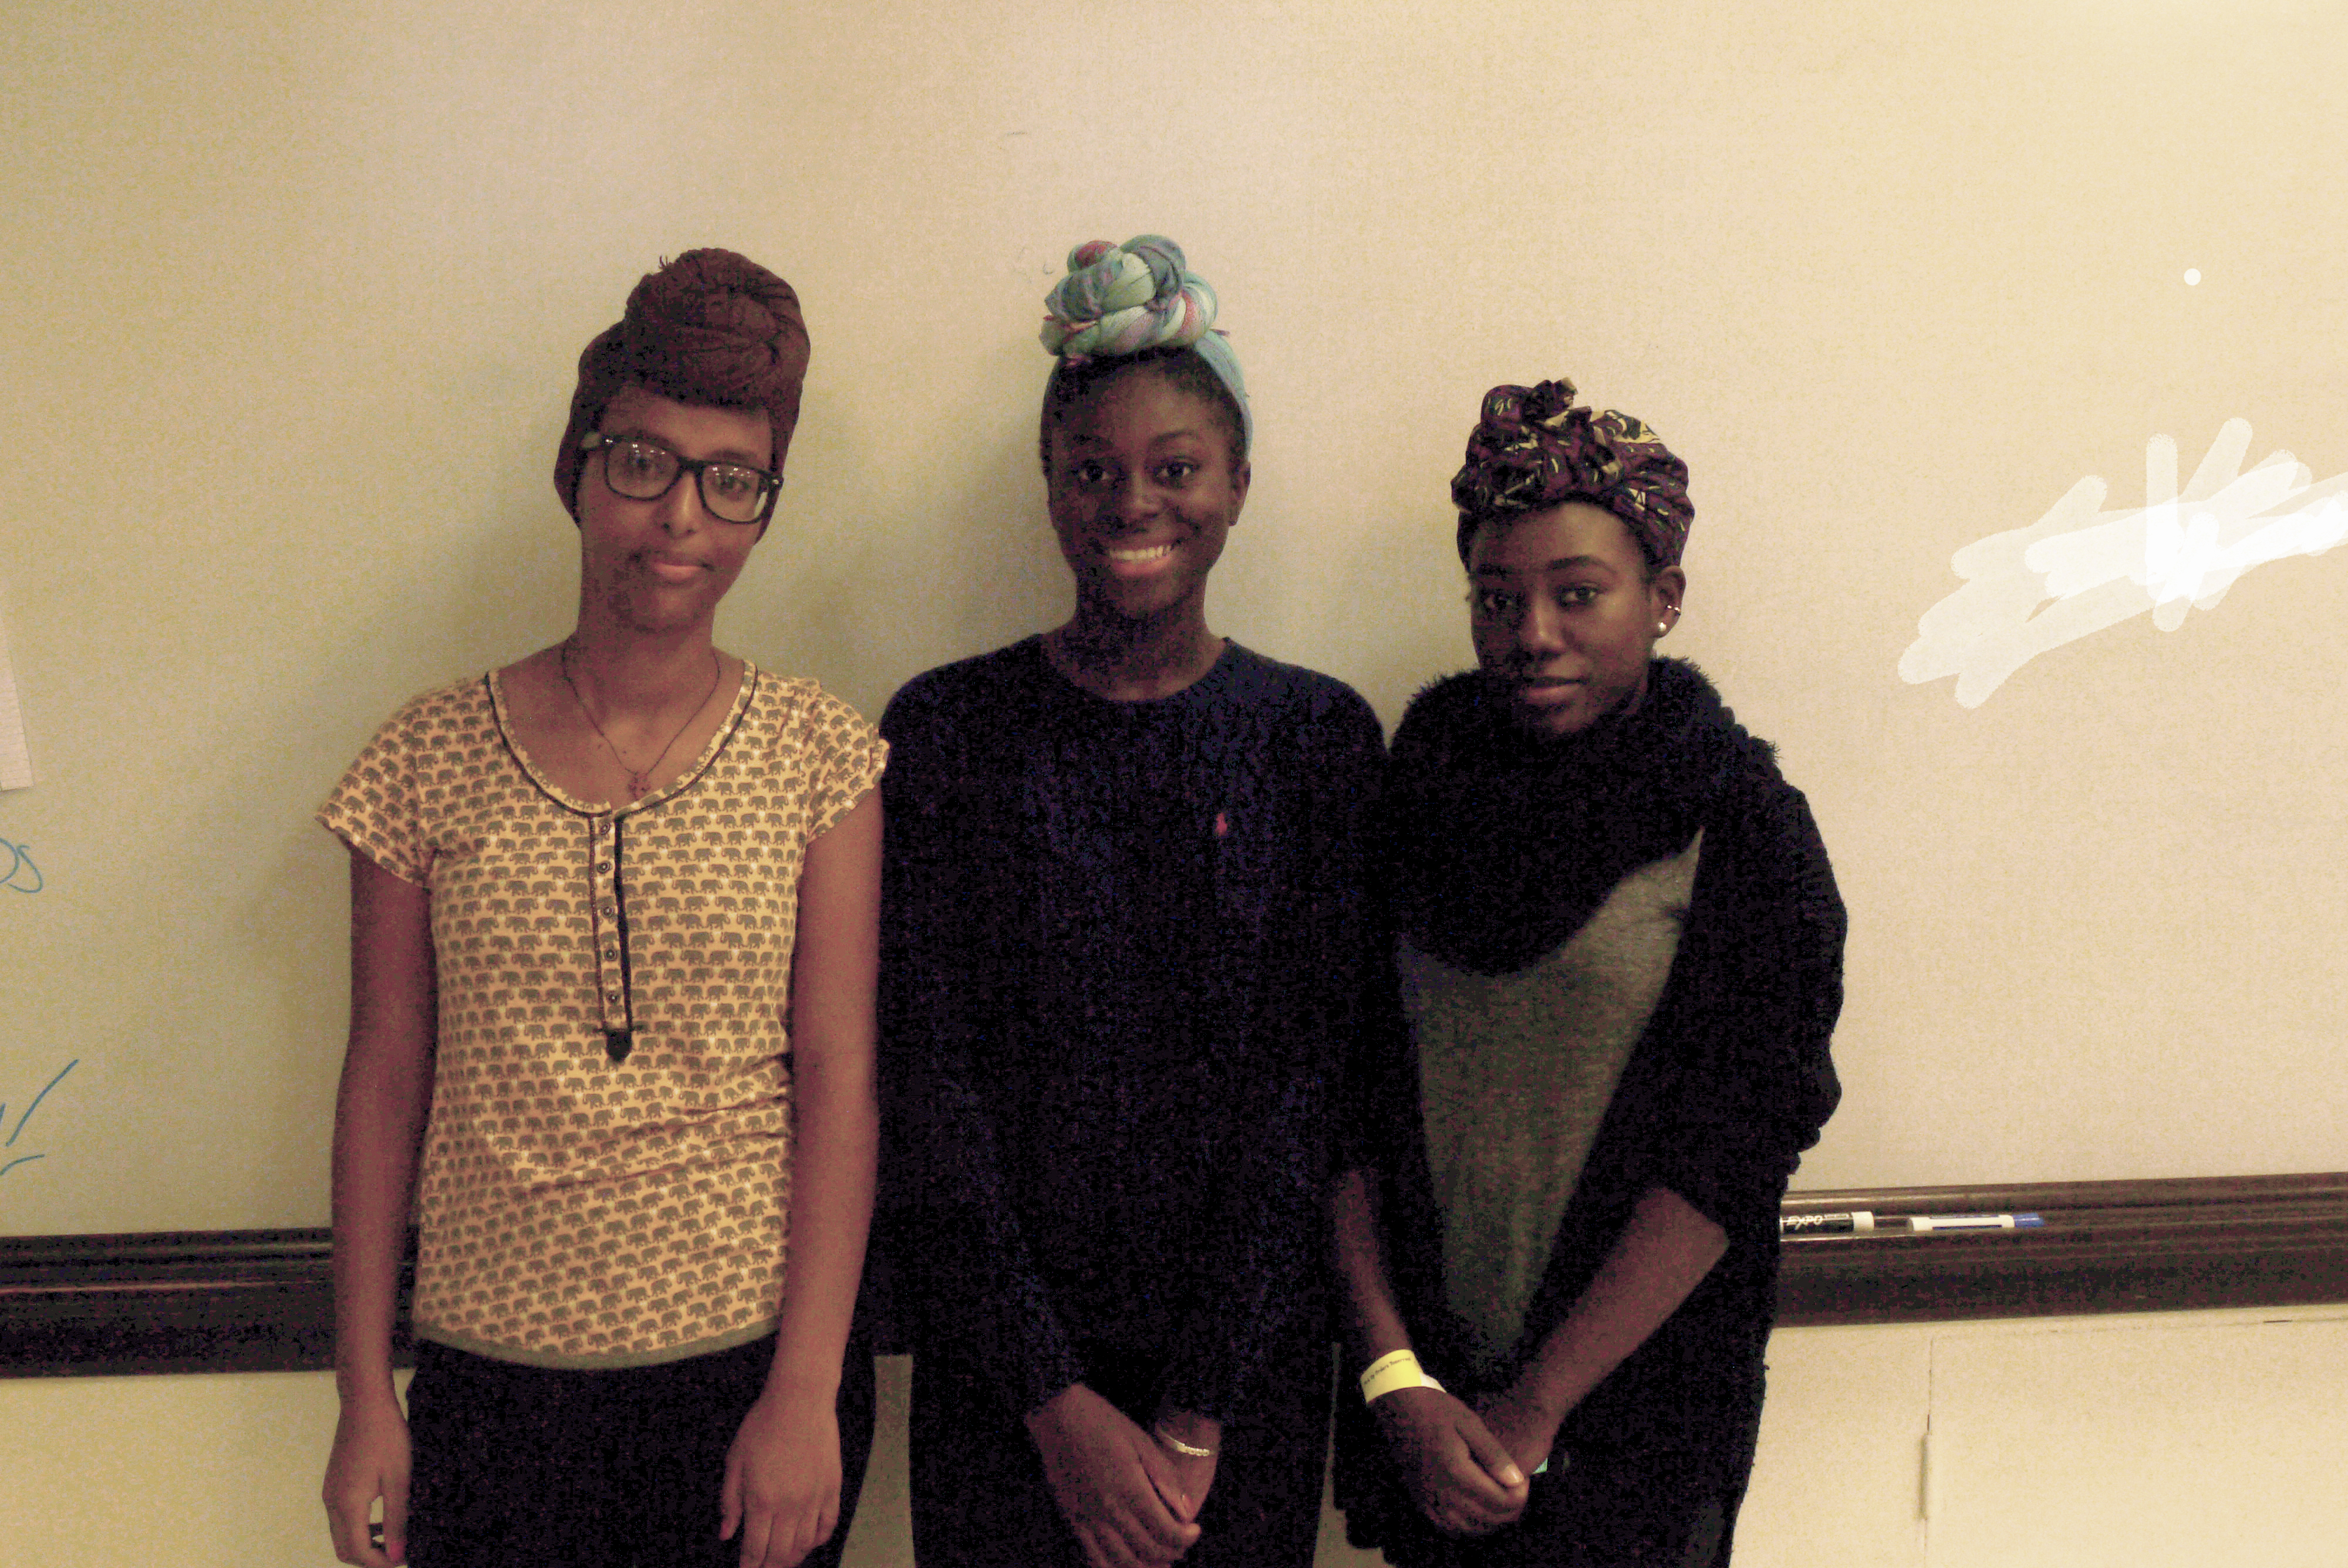 From left to right: sophomore Birukti Tsige, sophomore Cedrina Missamou and junior Ruthie Bilimo wearing headwraps. Photo taken by Tenzin Dorjee.